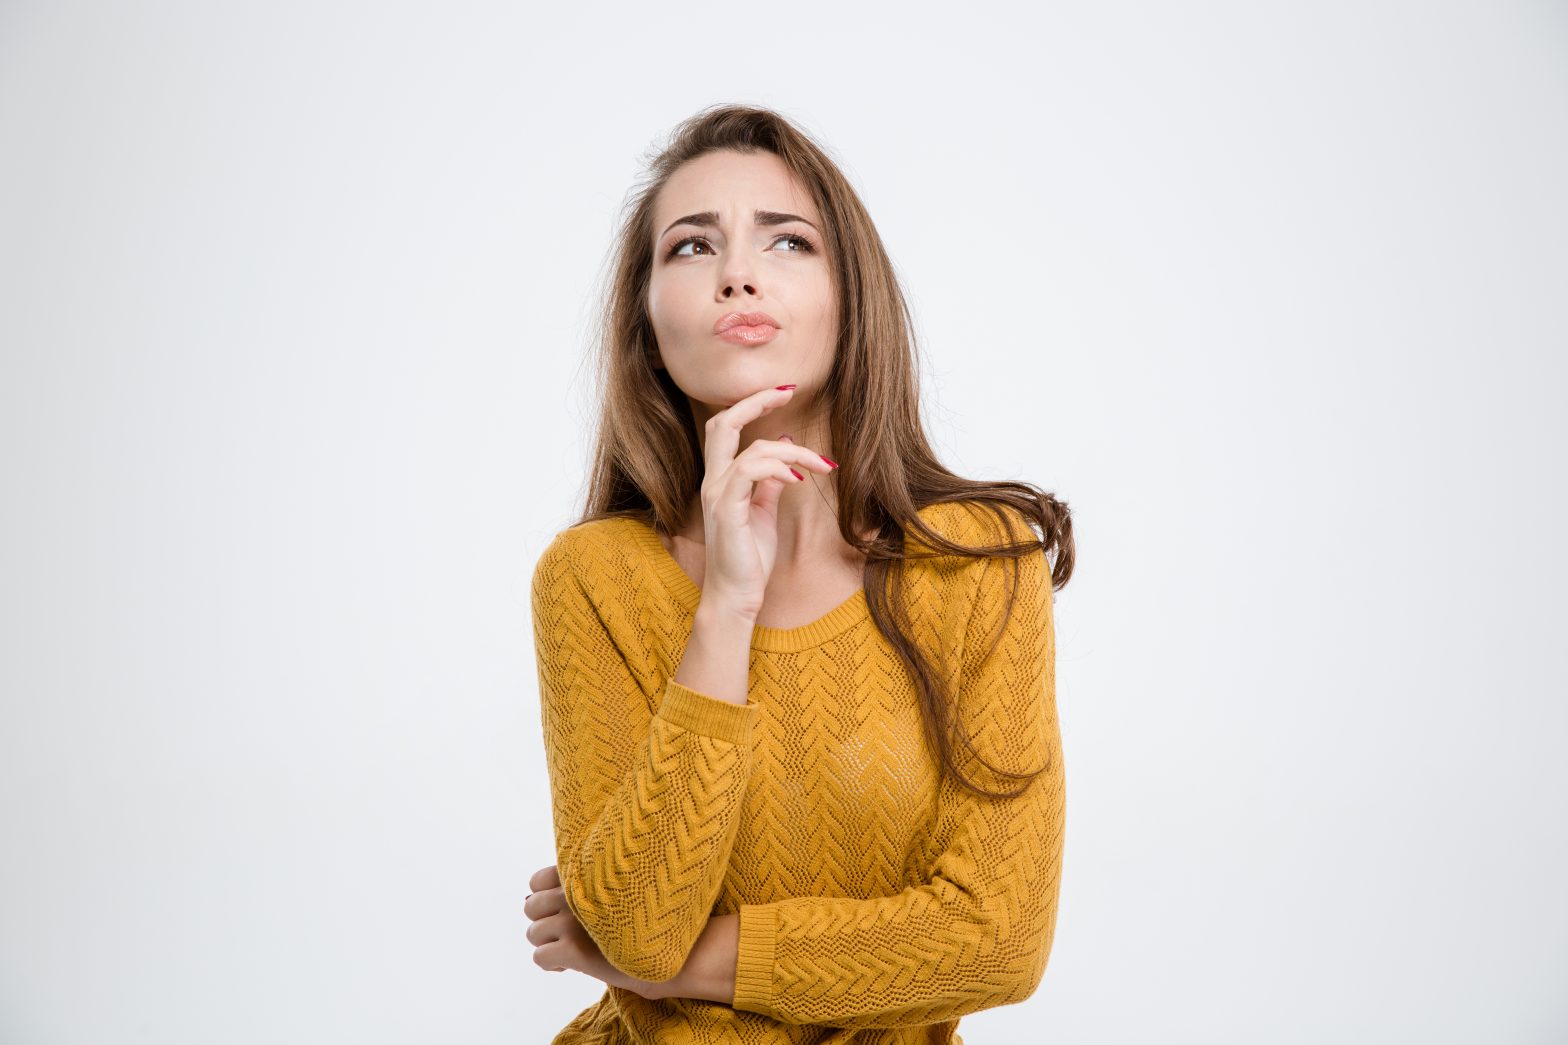 Portrait of a pensive woman standing isolated on a white background